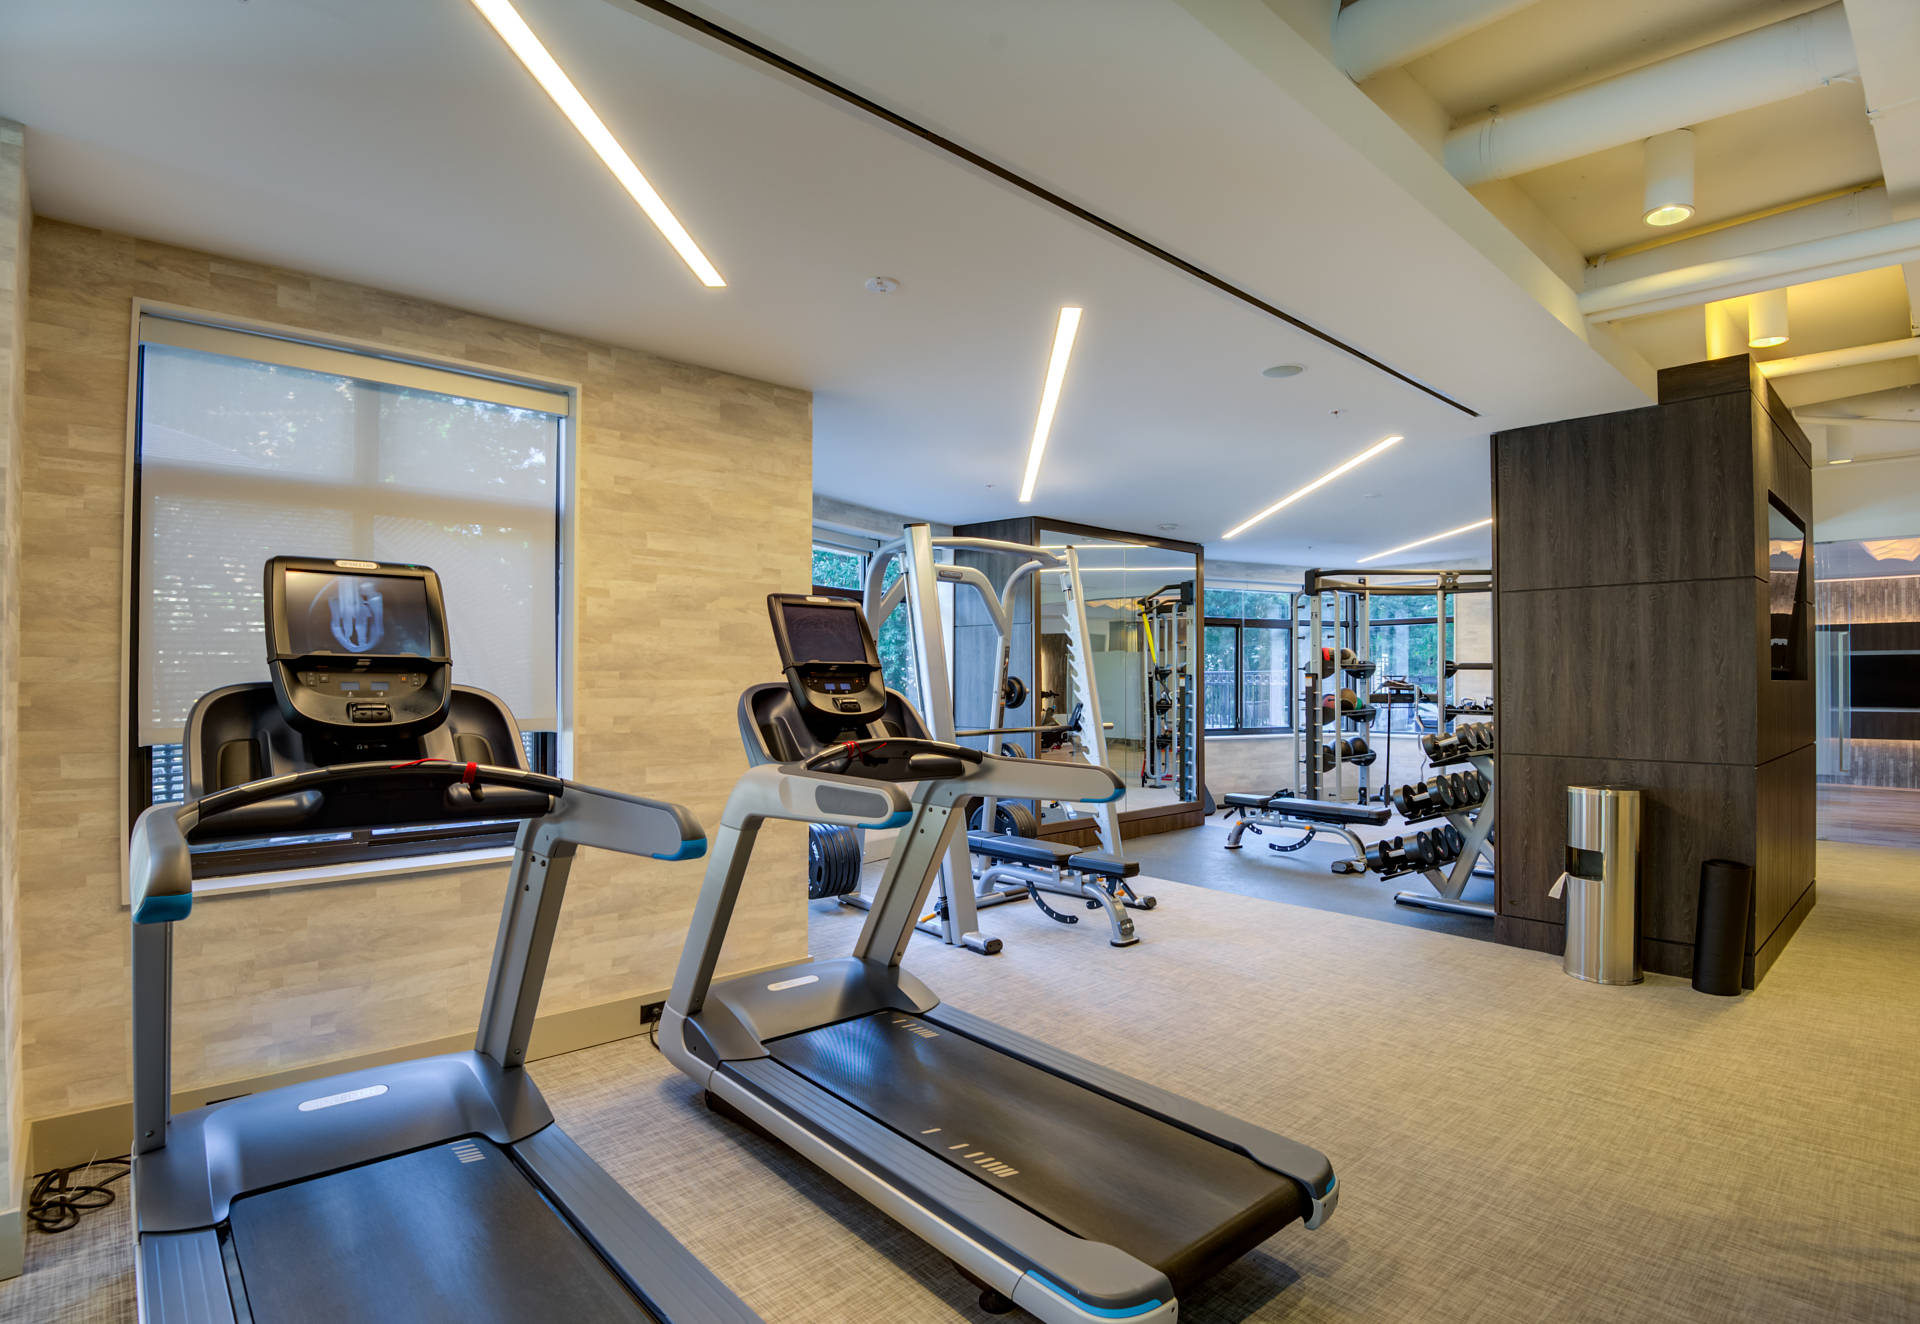 Work up a sweat in our fitness center.